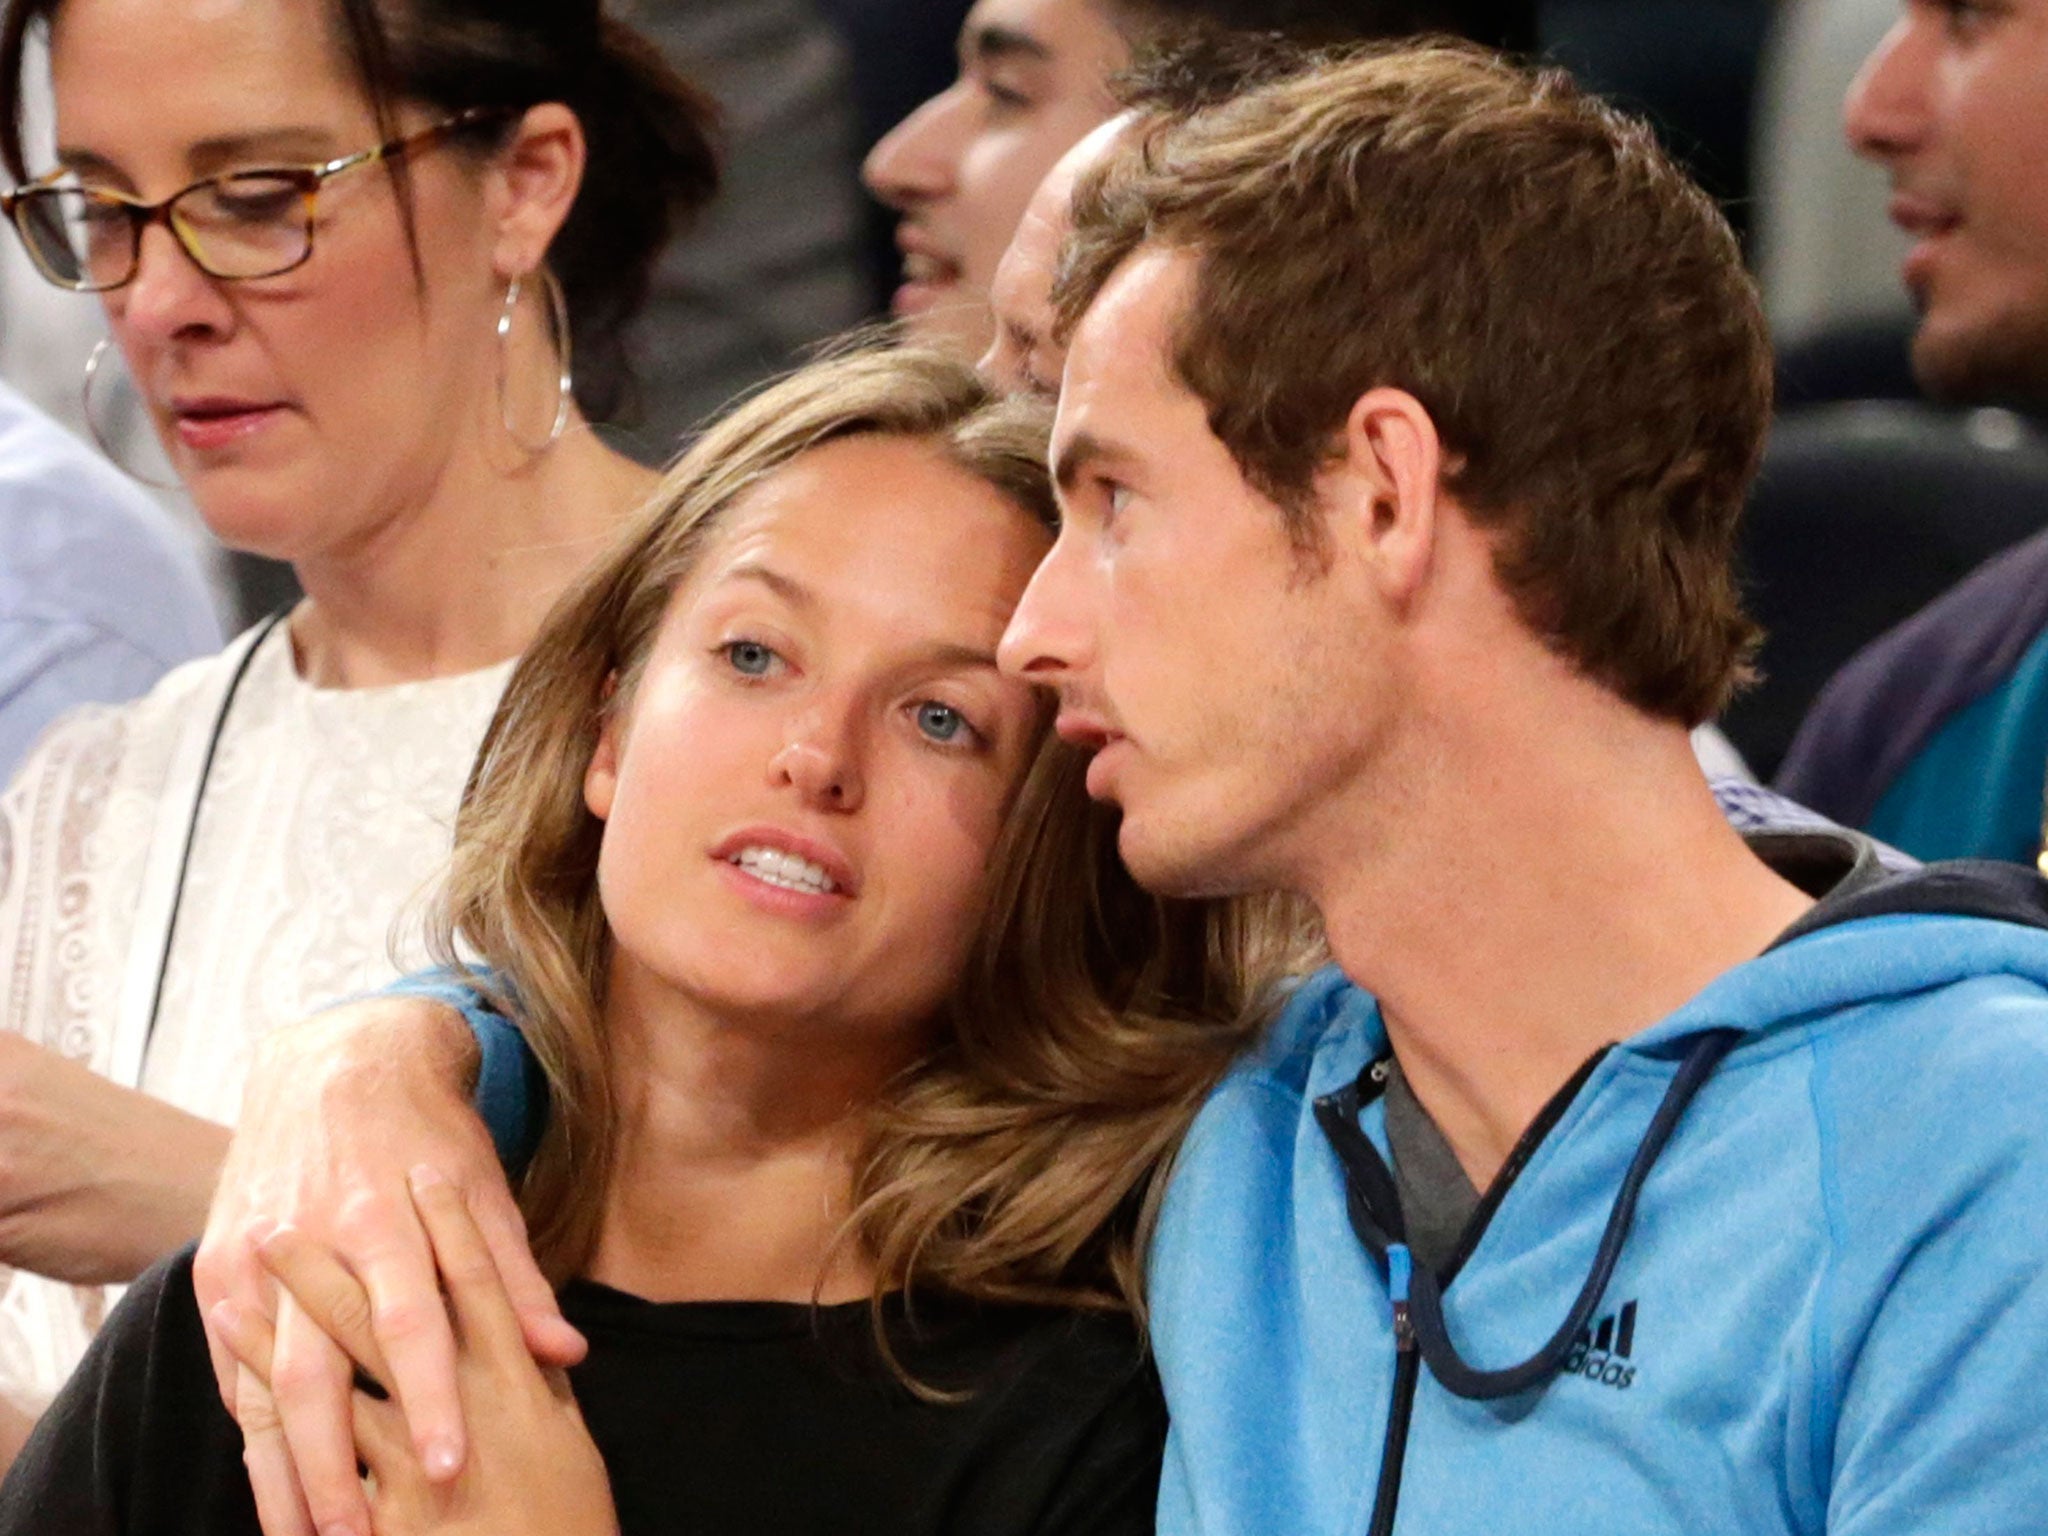 Andy Murray attends a basketball game in Madison Square Garden with girlfriend Kim Sears. Once again he carries British hopes into the US Open fray